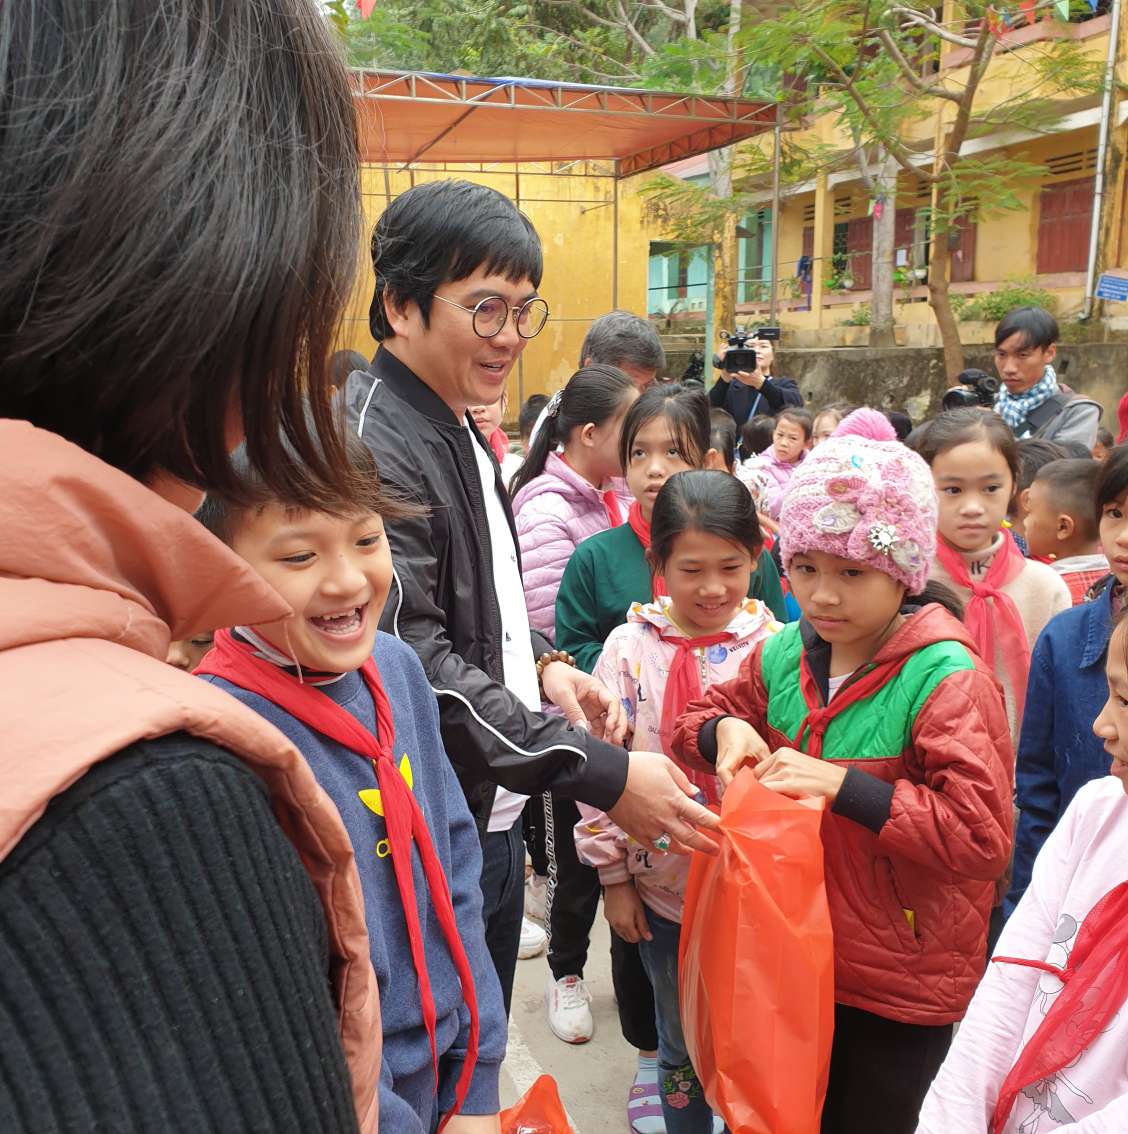 Babeeni donated 100 winter jackets to children in Ha Giang province